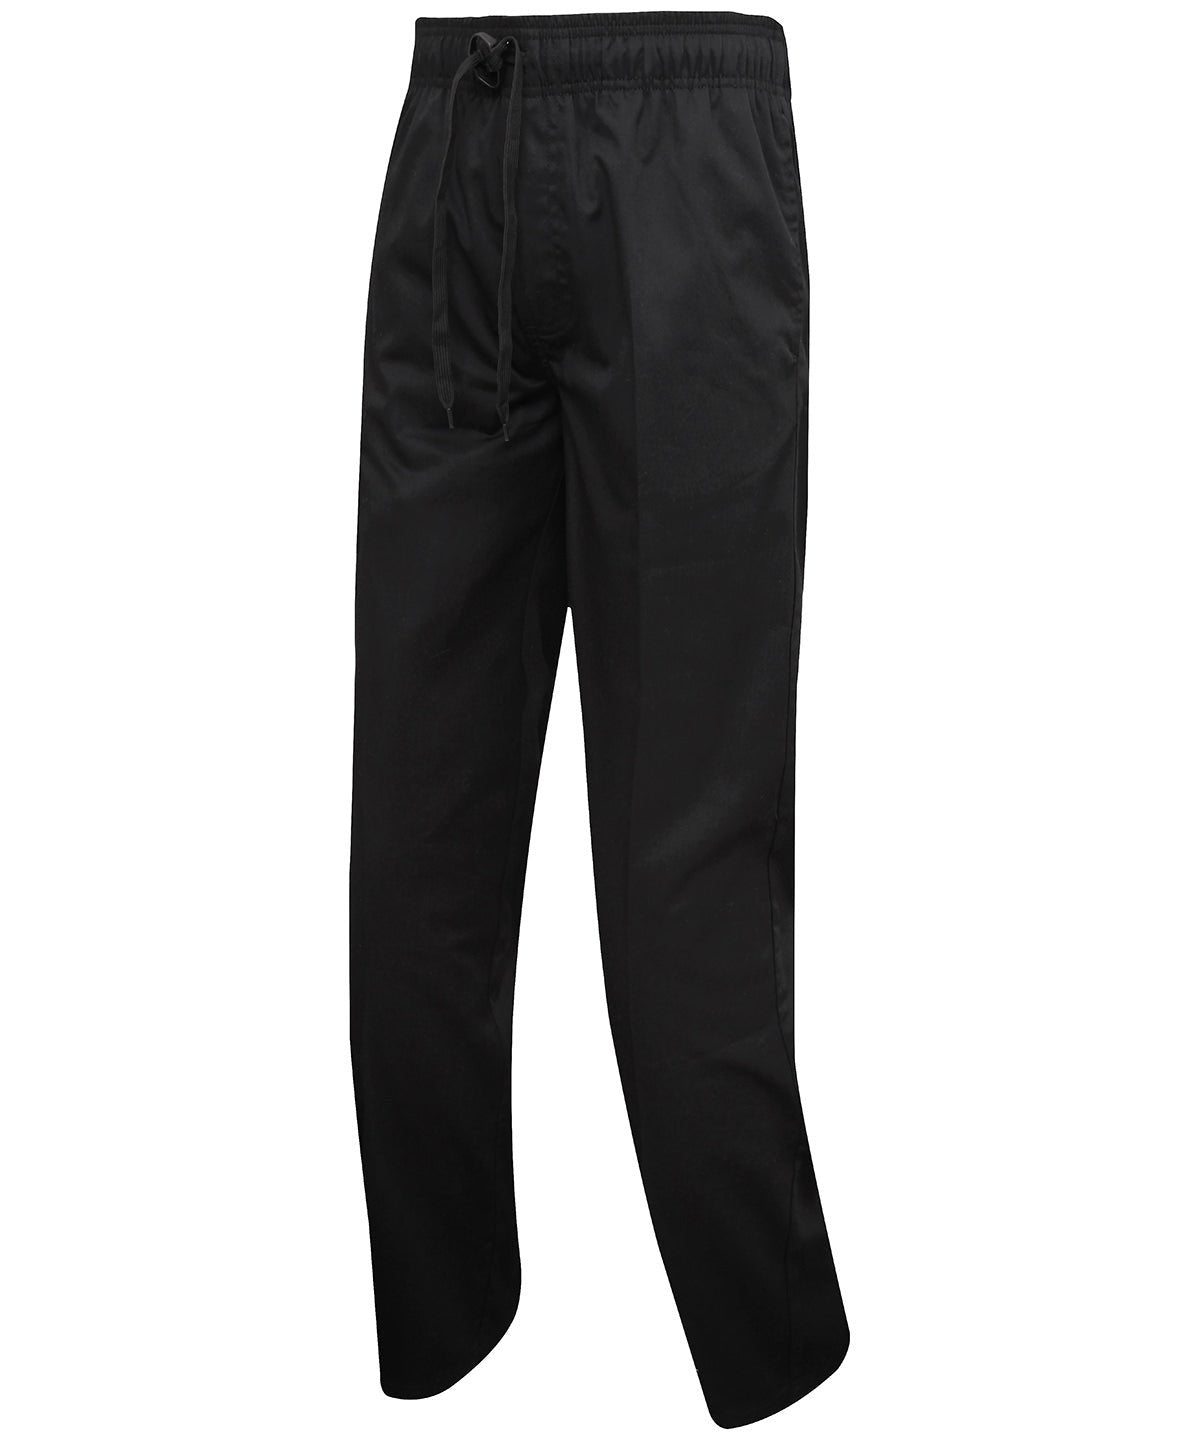 Premier Select Slim Leg Chef's Trousers - 24 Workwear - Trousers